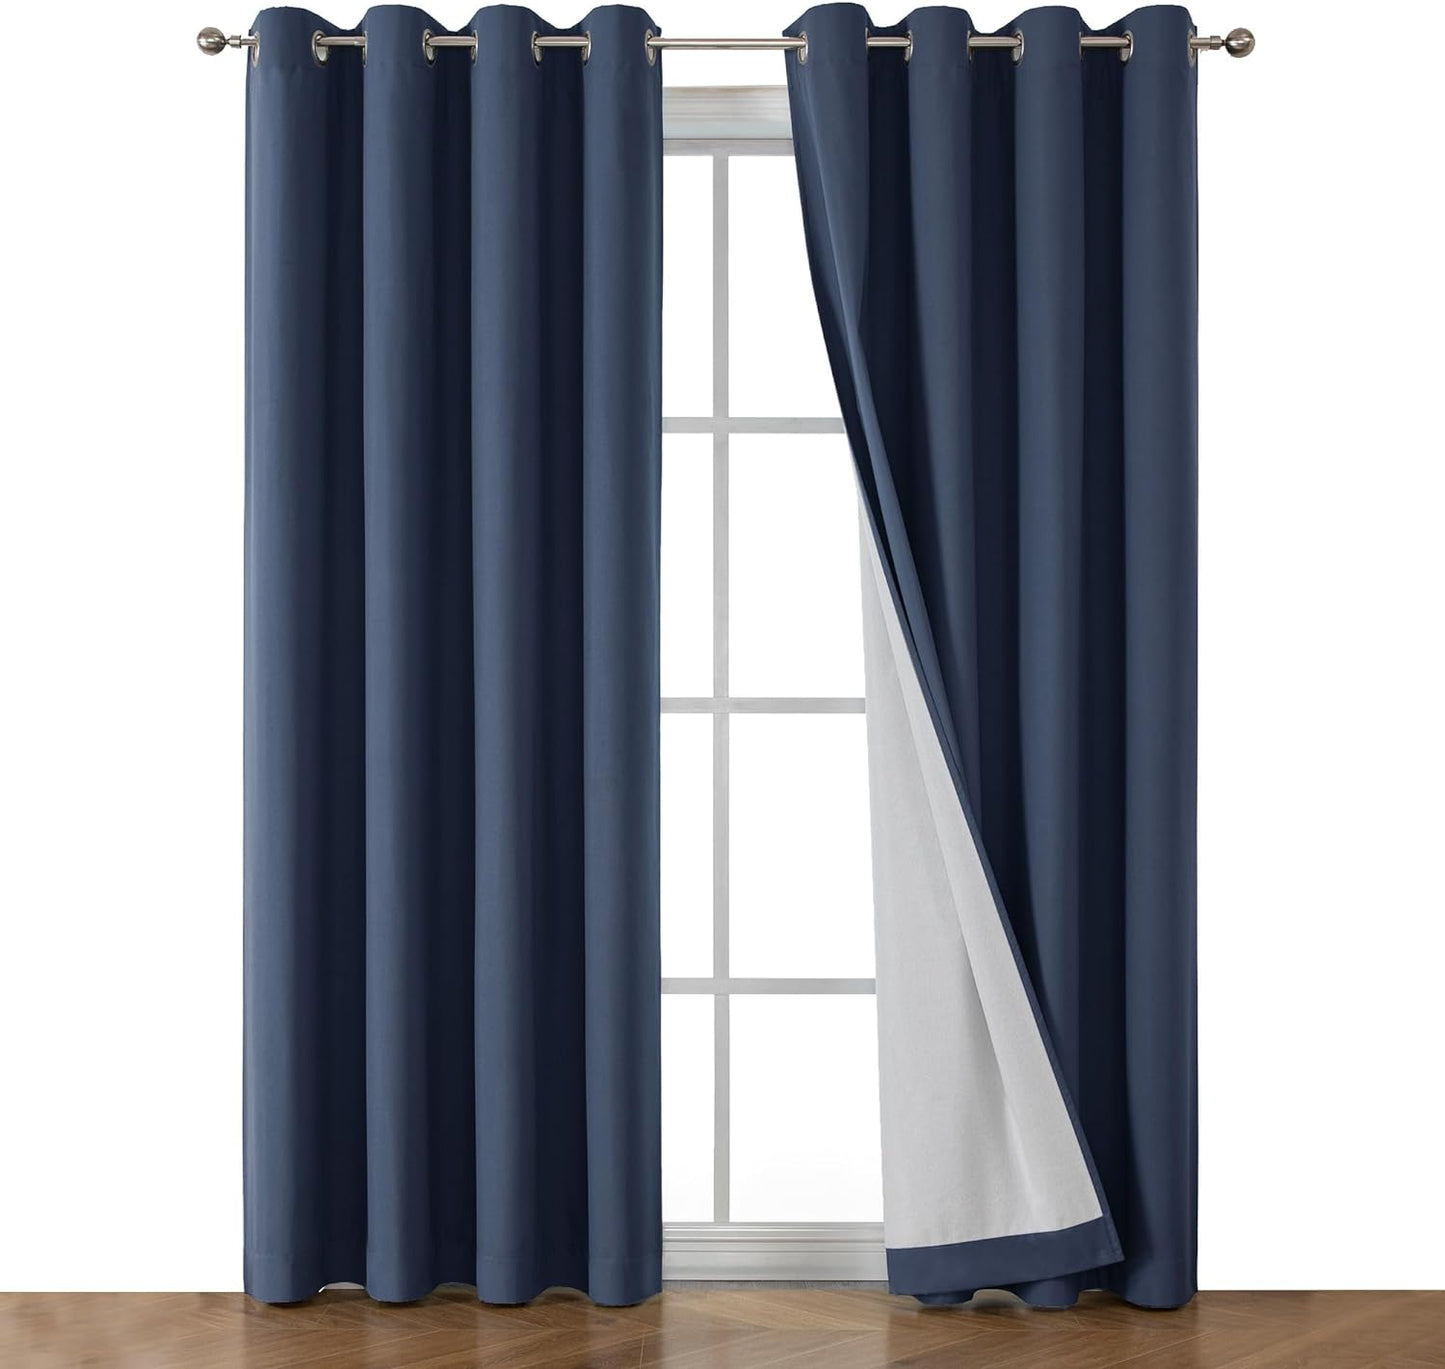 OWENIE Maya 100% Blackout Curtains 84 Inch Length 2 Panels Set, Greyish White Solid Heavy Thermal Insulated Grommets Curtains for Bedroom & Living Room, 2 Panels (Each 52 W X 84 L,Greyish White)  OWENIE Navy Blue 52W X 96L 